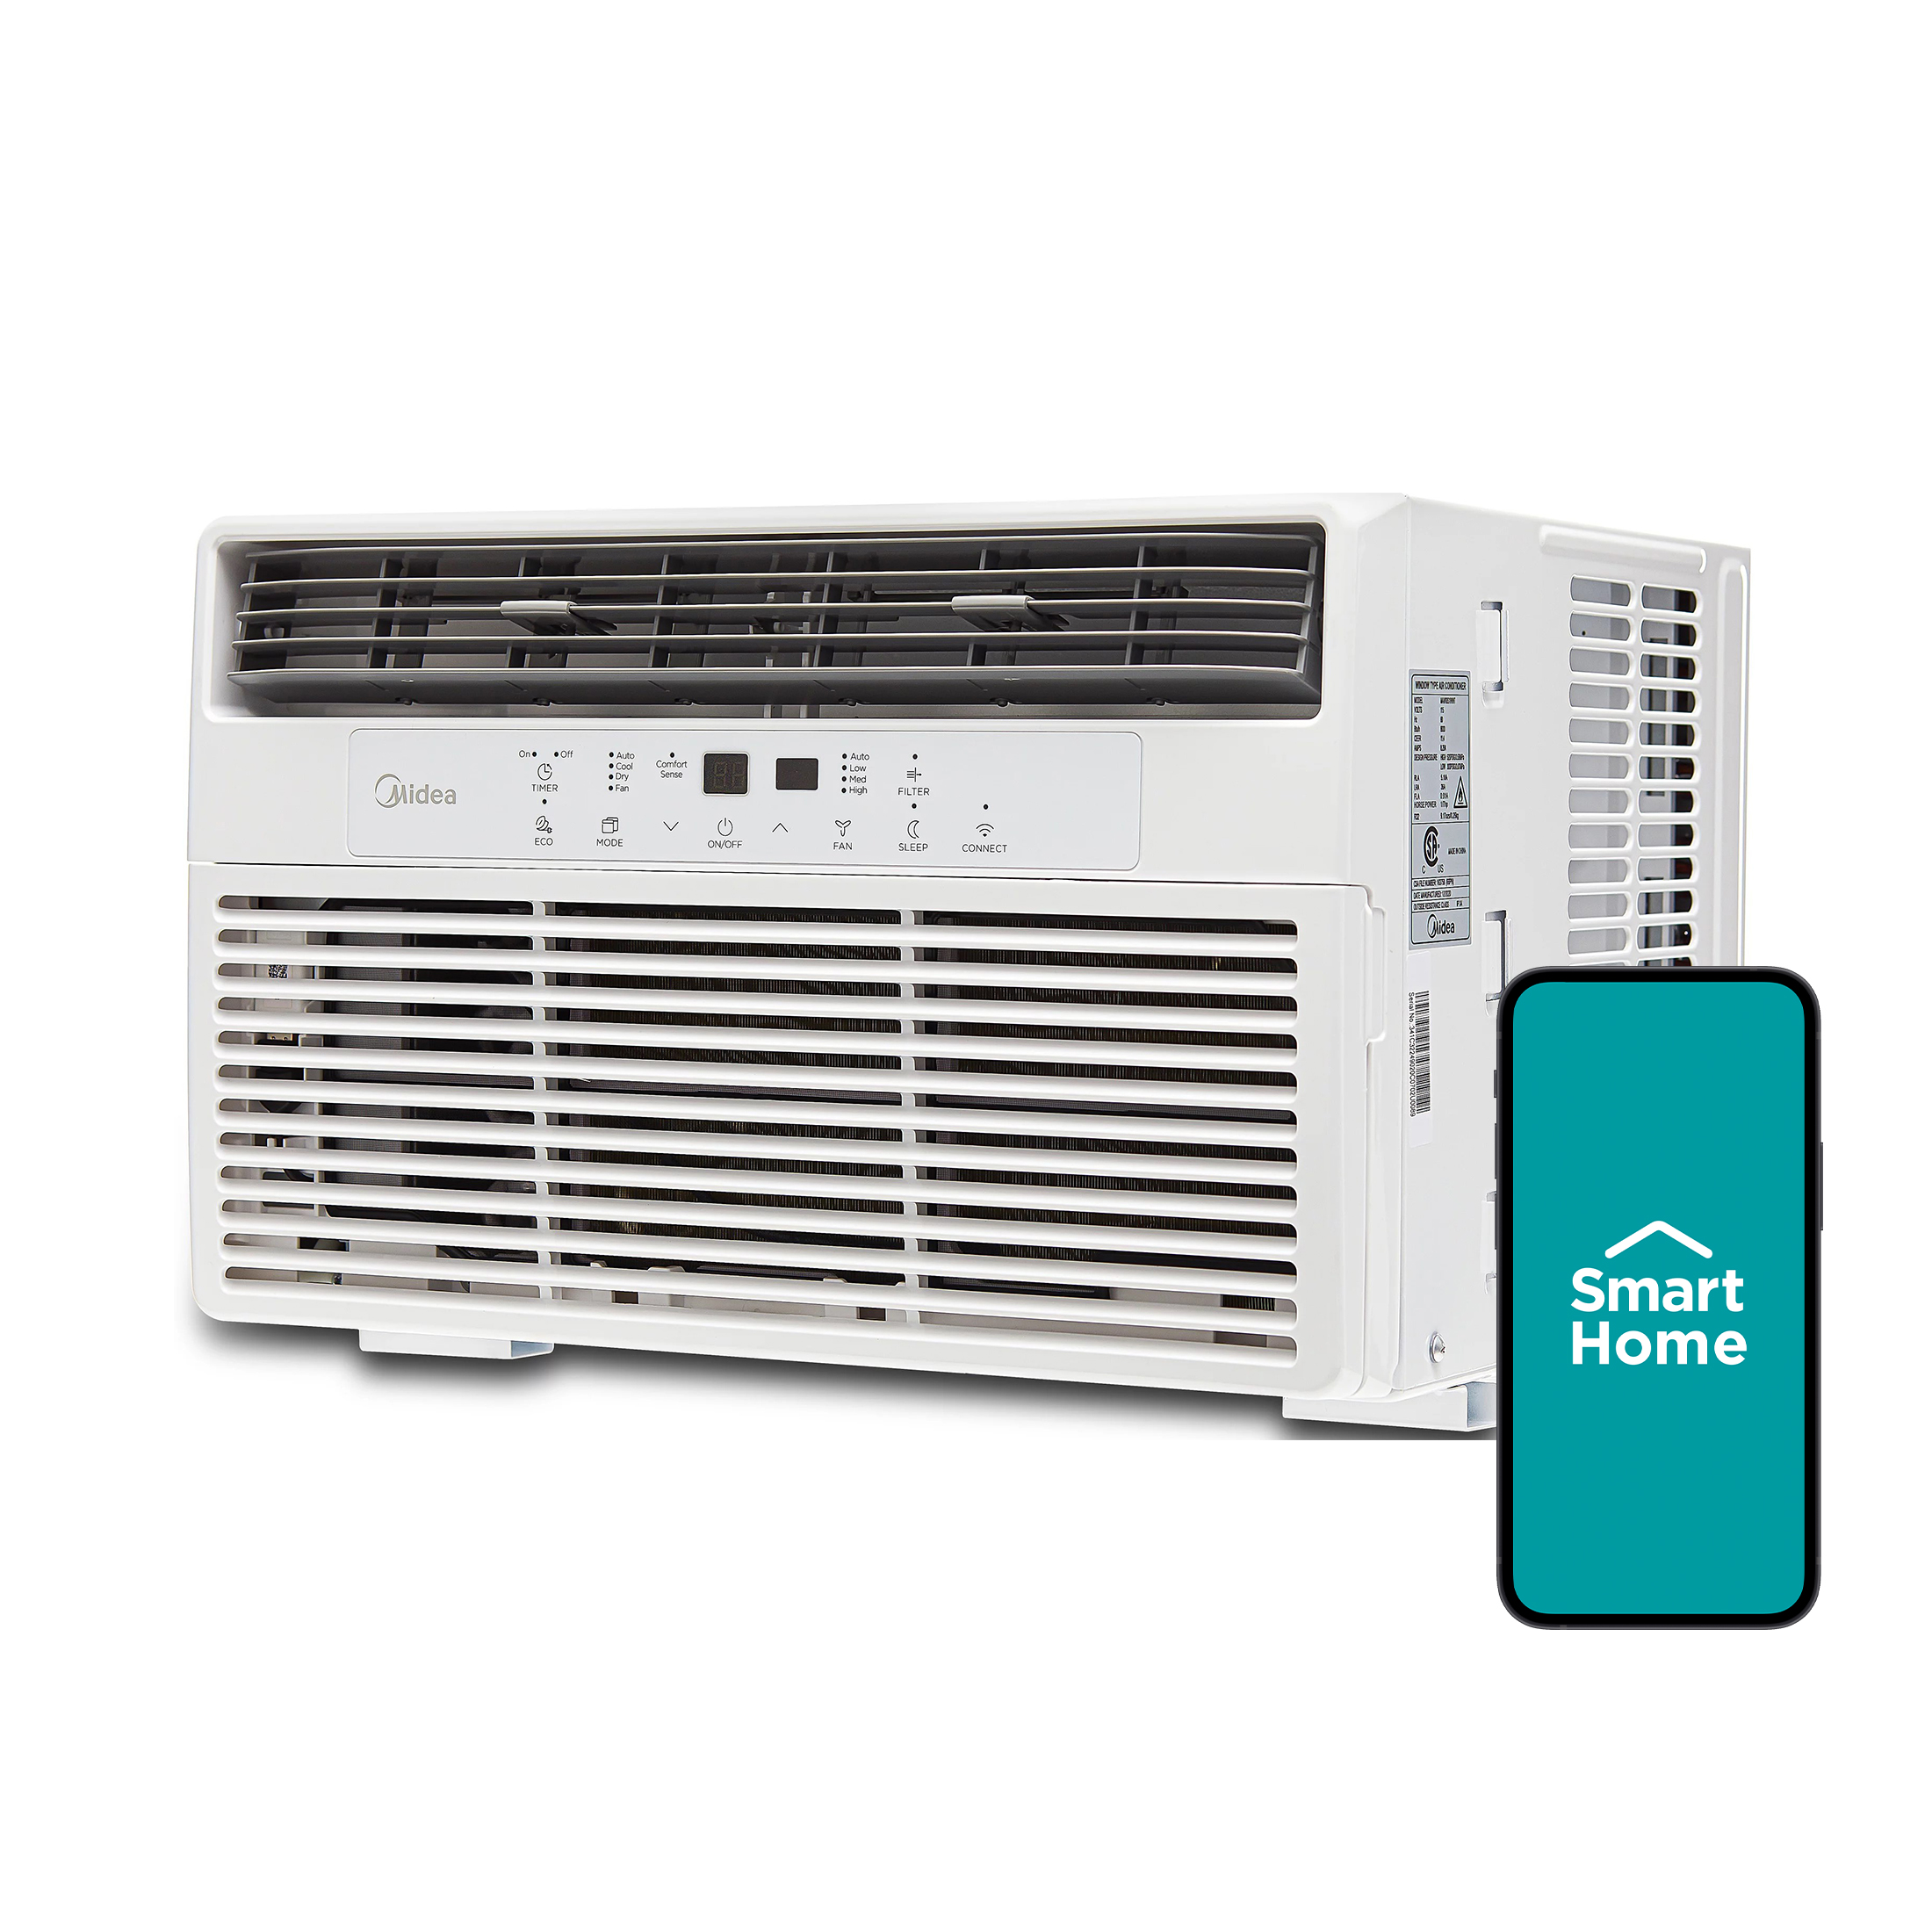 Midea 8,000 BTU 115V Smart Window Air Conditioner with Comfort Sense Remote, Covers up to 350 Sq. ft., White, MAW08S1WWT - image 1 of 22